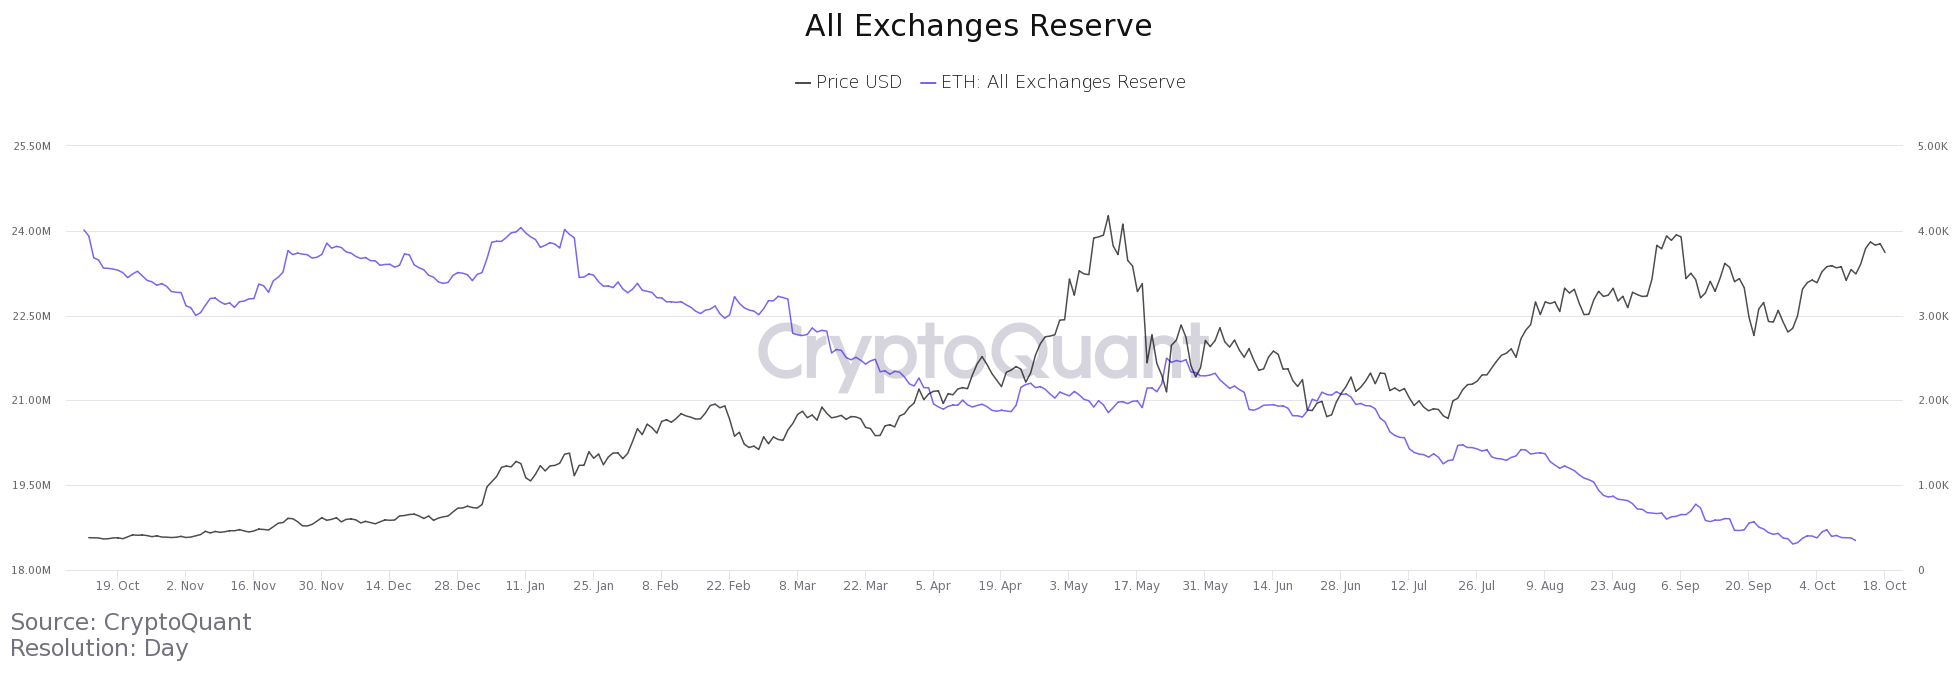 Ethereum All Exchanges Reserve